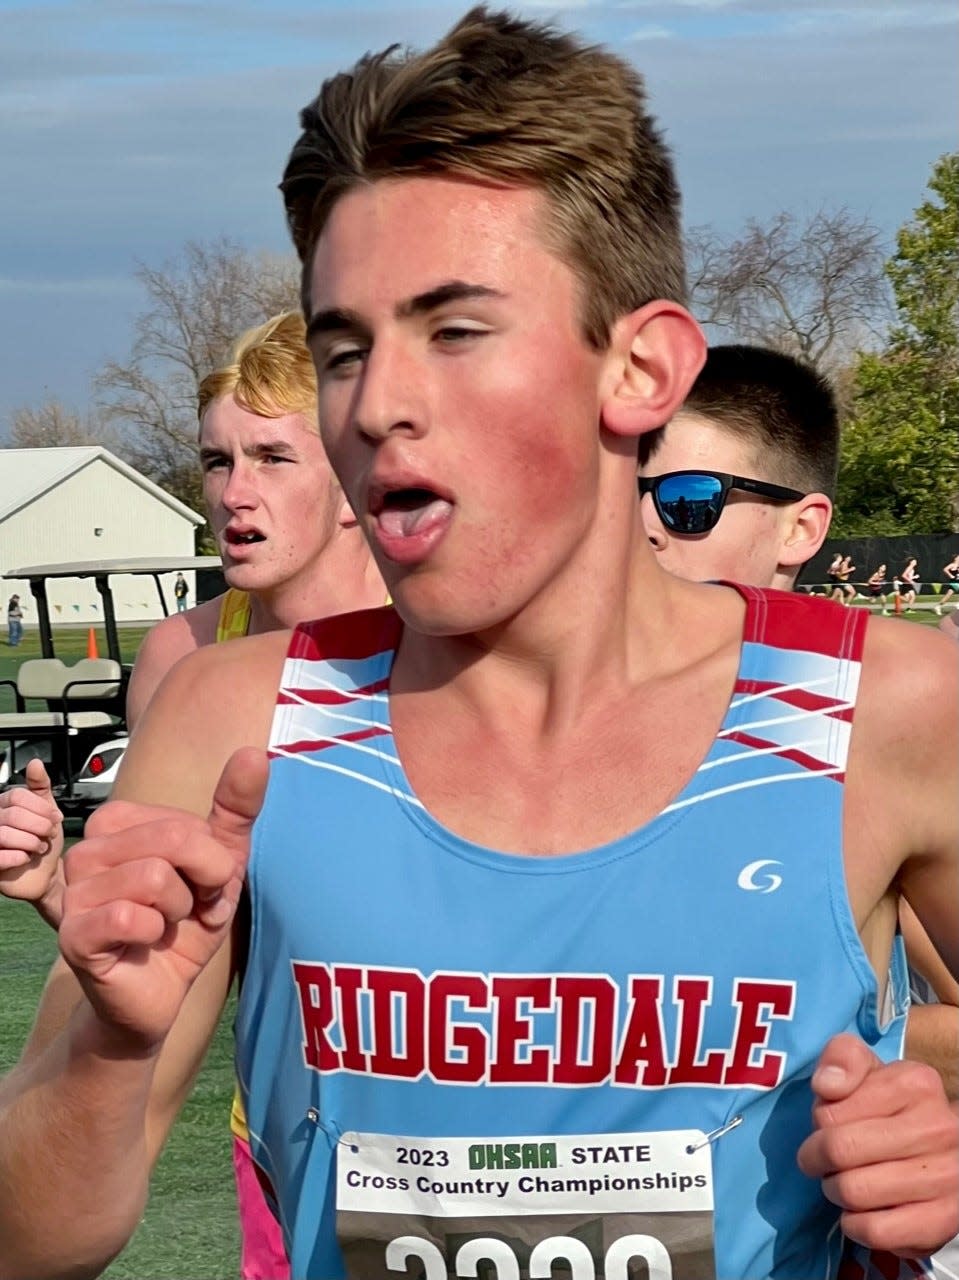 Ridgedale's Brogan Weston runs in the Division III boys cross country state championships at Fortress Obetz. He was 46th in 16:49 in his first trip to the state meet.